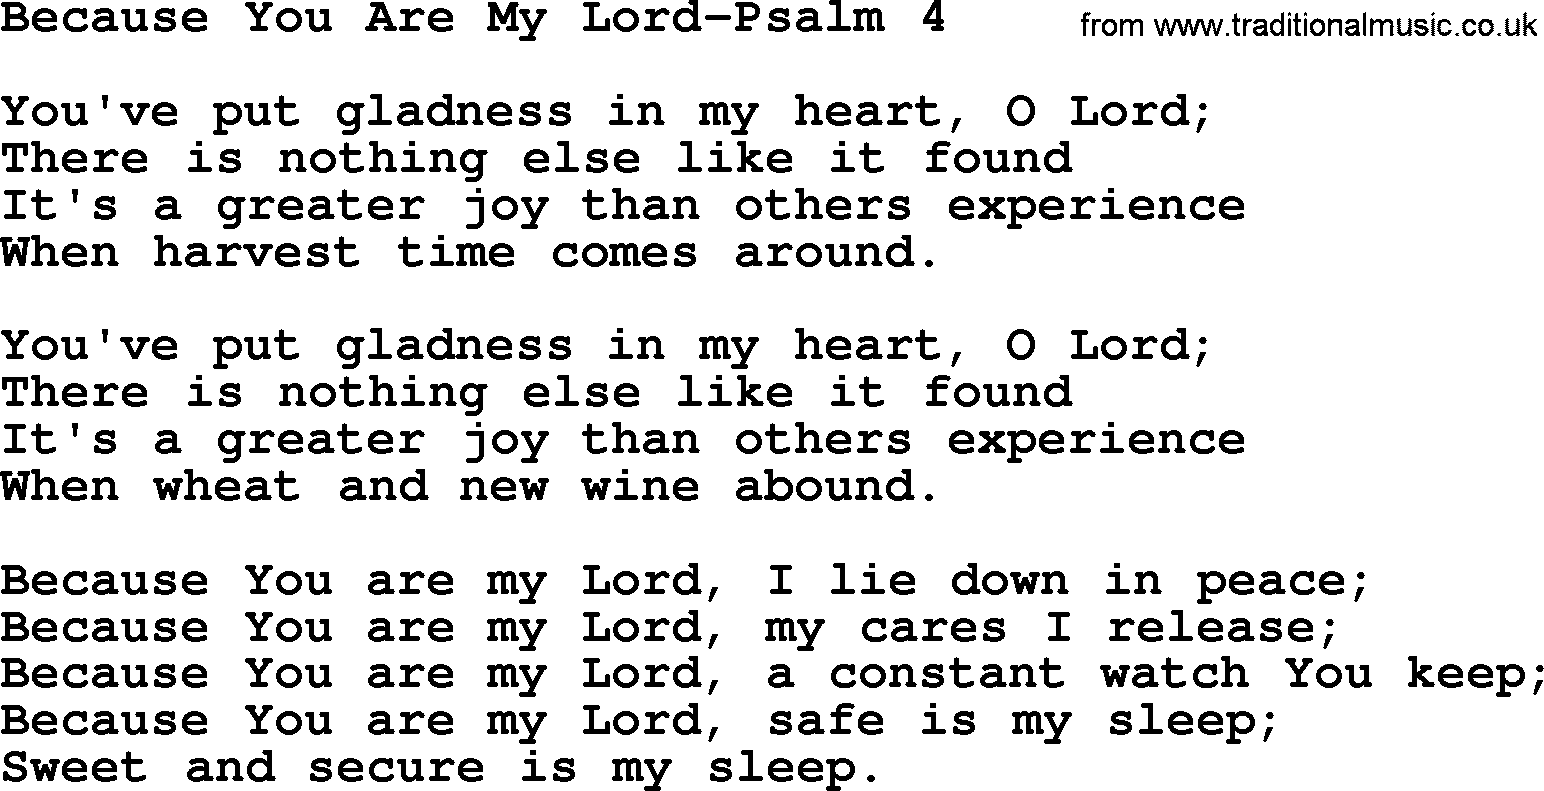 Hymns from the Psalms, Hymn: Because You Are My Lord-Psalm 4, lyrics with PDF